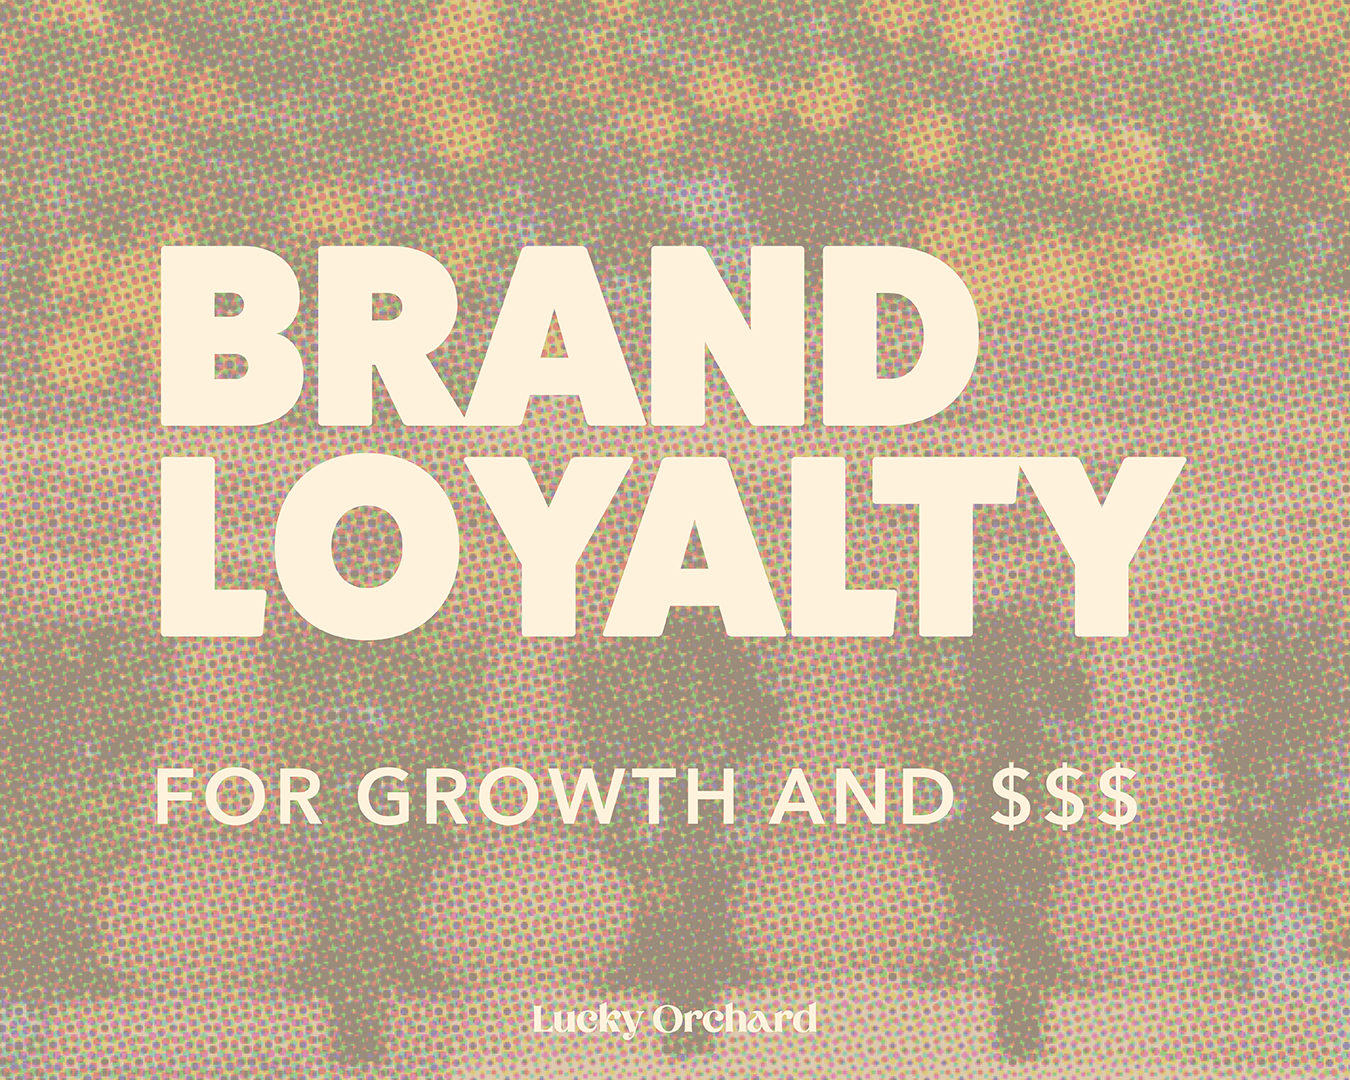 Brand Loyalty for growth and making money